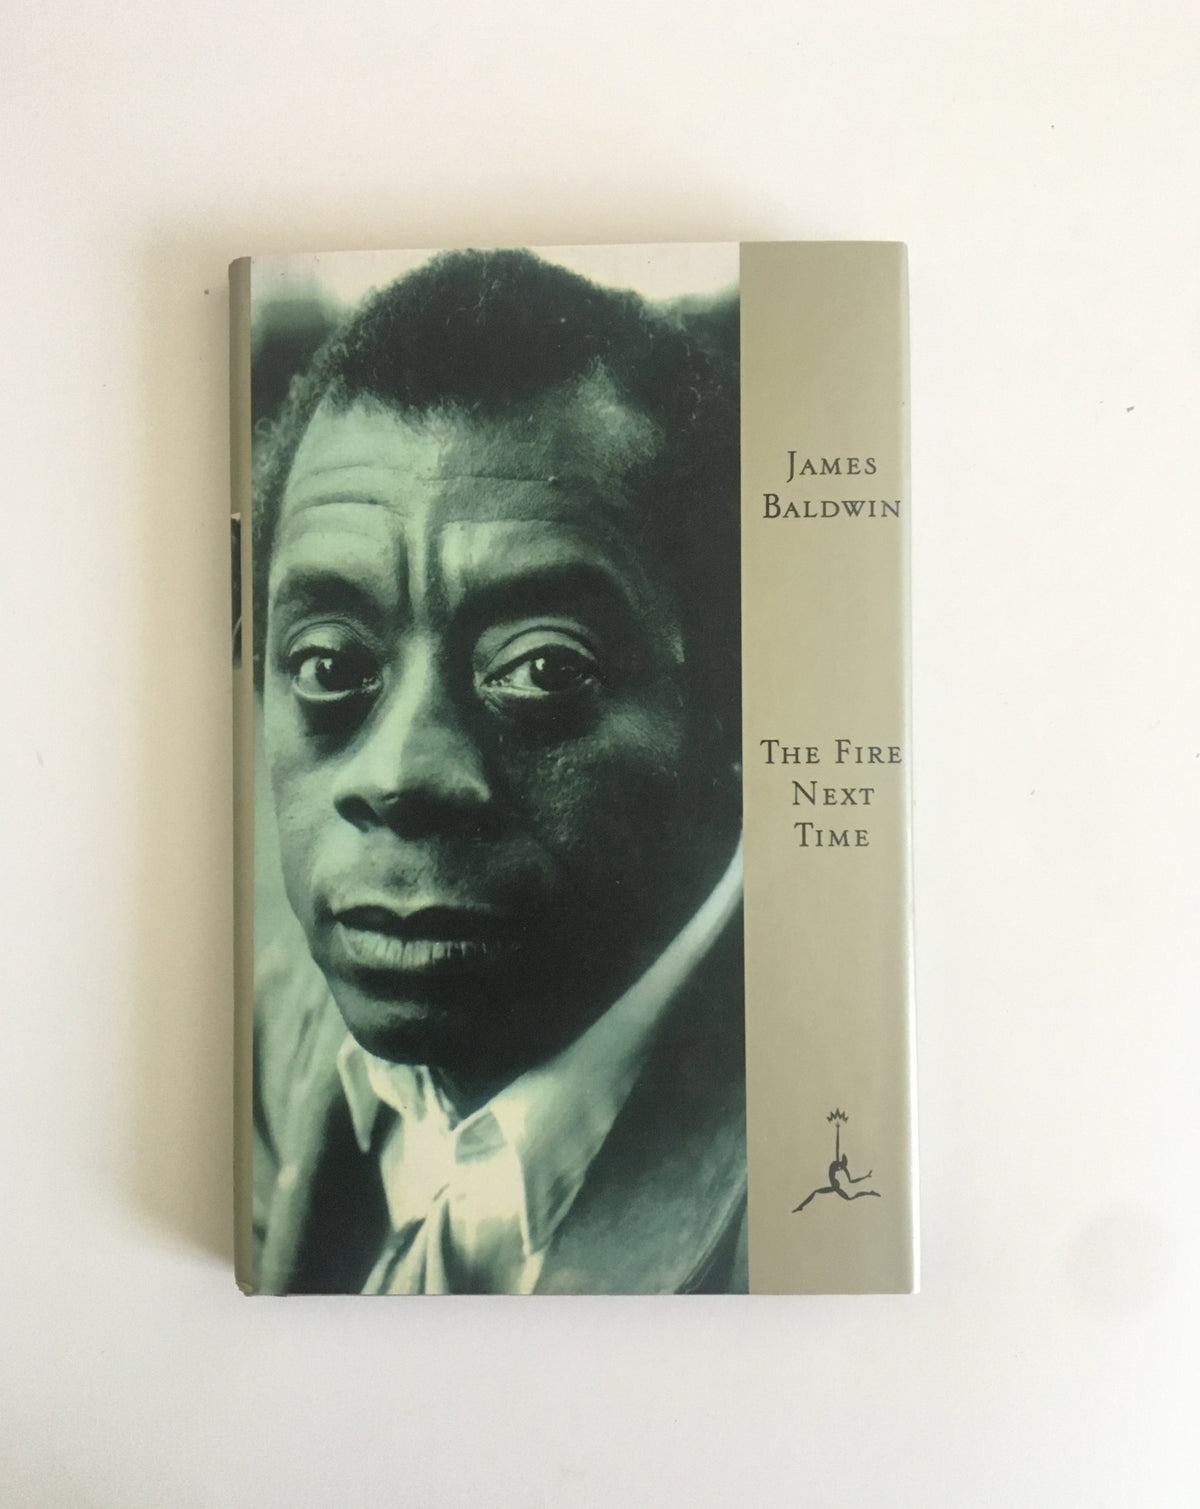 The Fire Next Time by James Baldwin